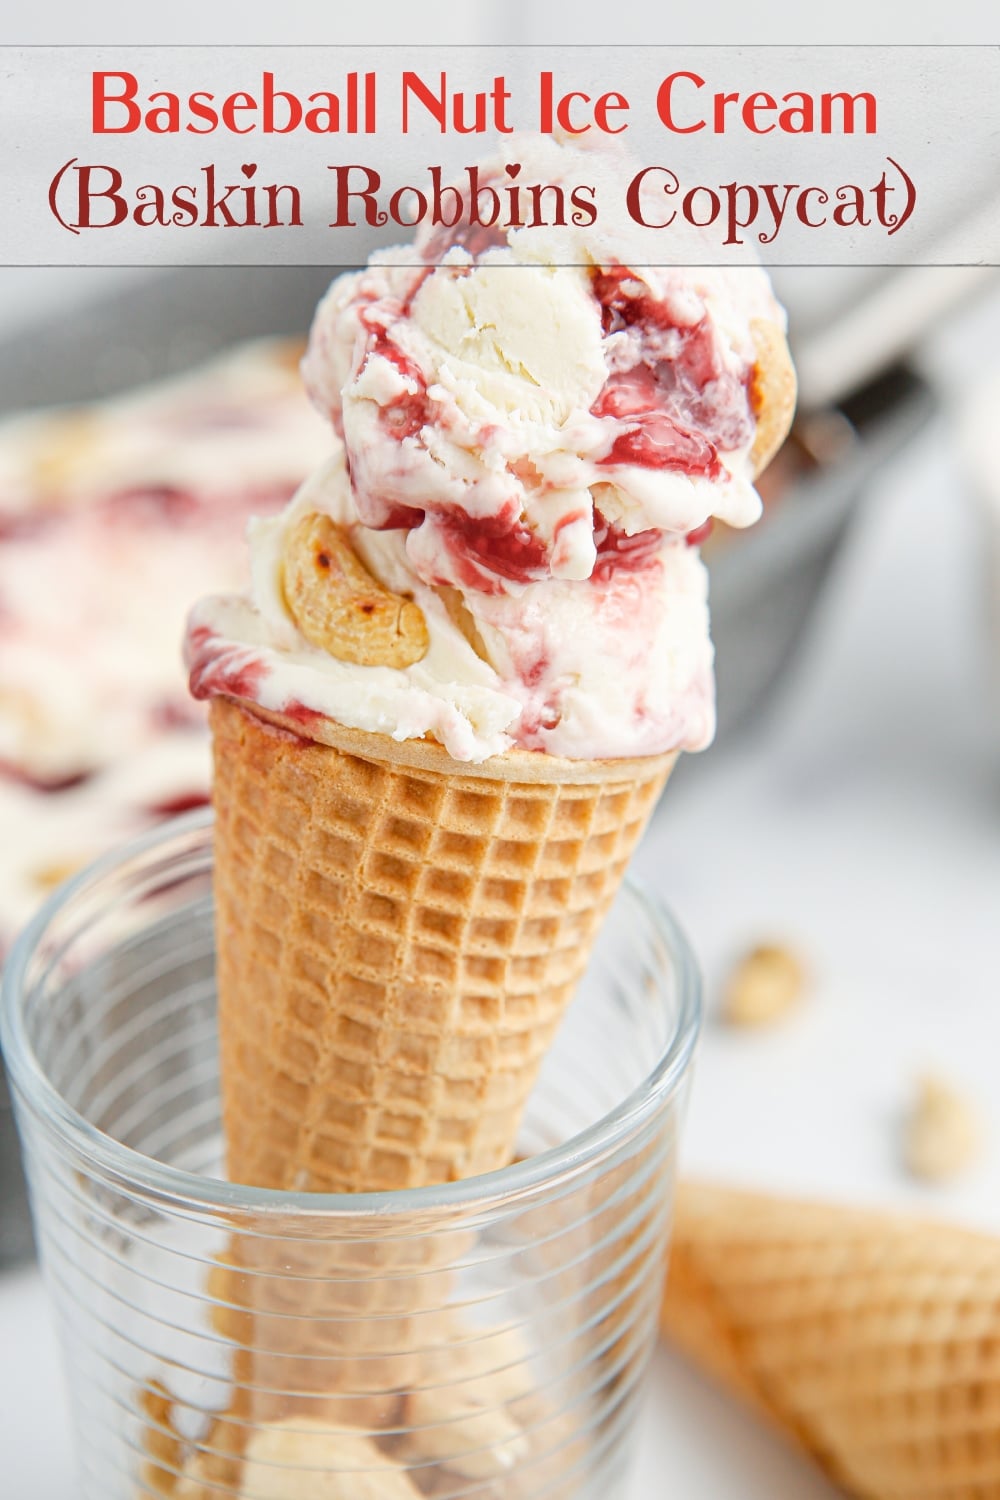 Studded with cashews and swirled with ribbons of raspberry and blackberry jam, this no churn version of Baseball Nut Ice Cream is an ice cream store favorite and simple enough to make at home. This copycat Baskin-Robbins copycat recipe is one of the best summer desserts and the best homemade ice cream via @cmpollak1